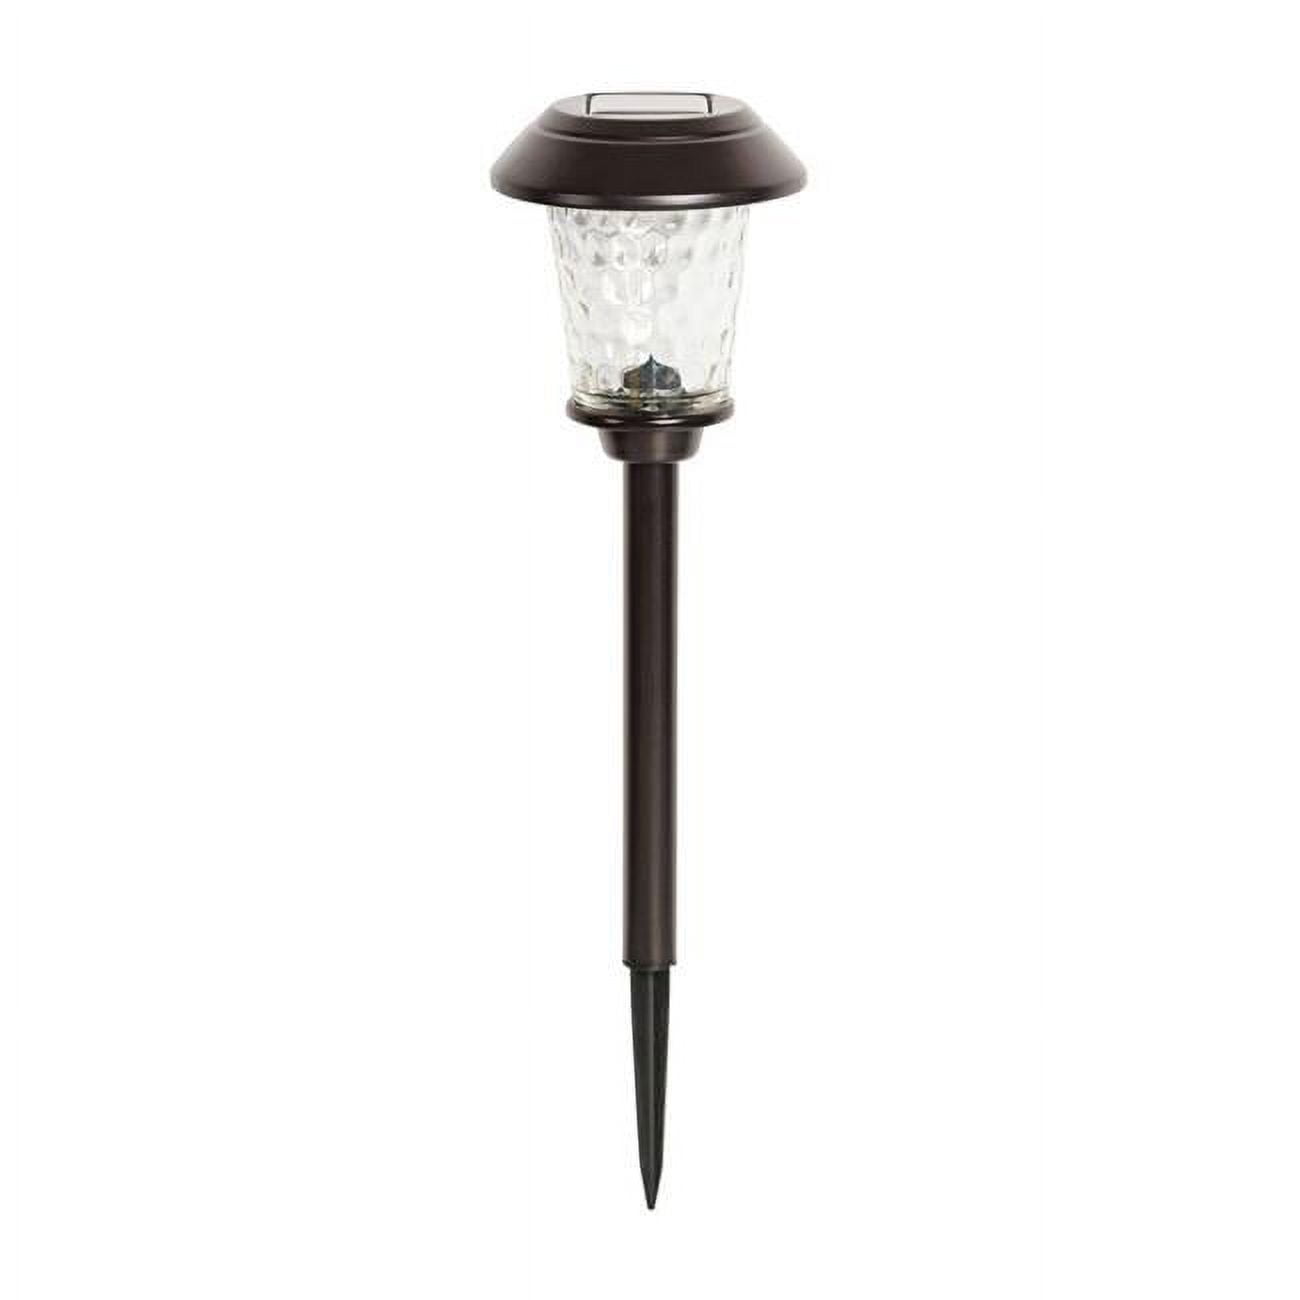 3908530 Oil Rubbed Bronze Solar Powered Led Pathway Light, Pack Of 9